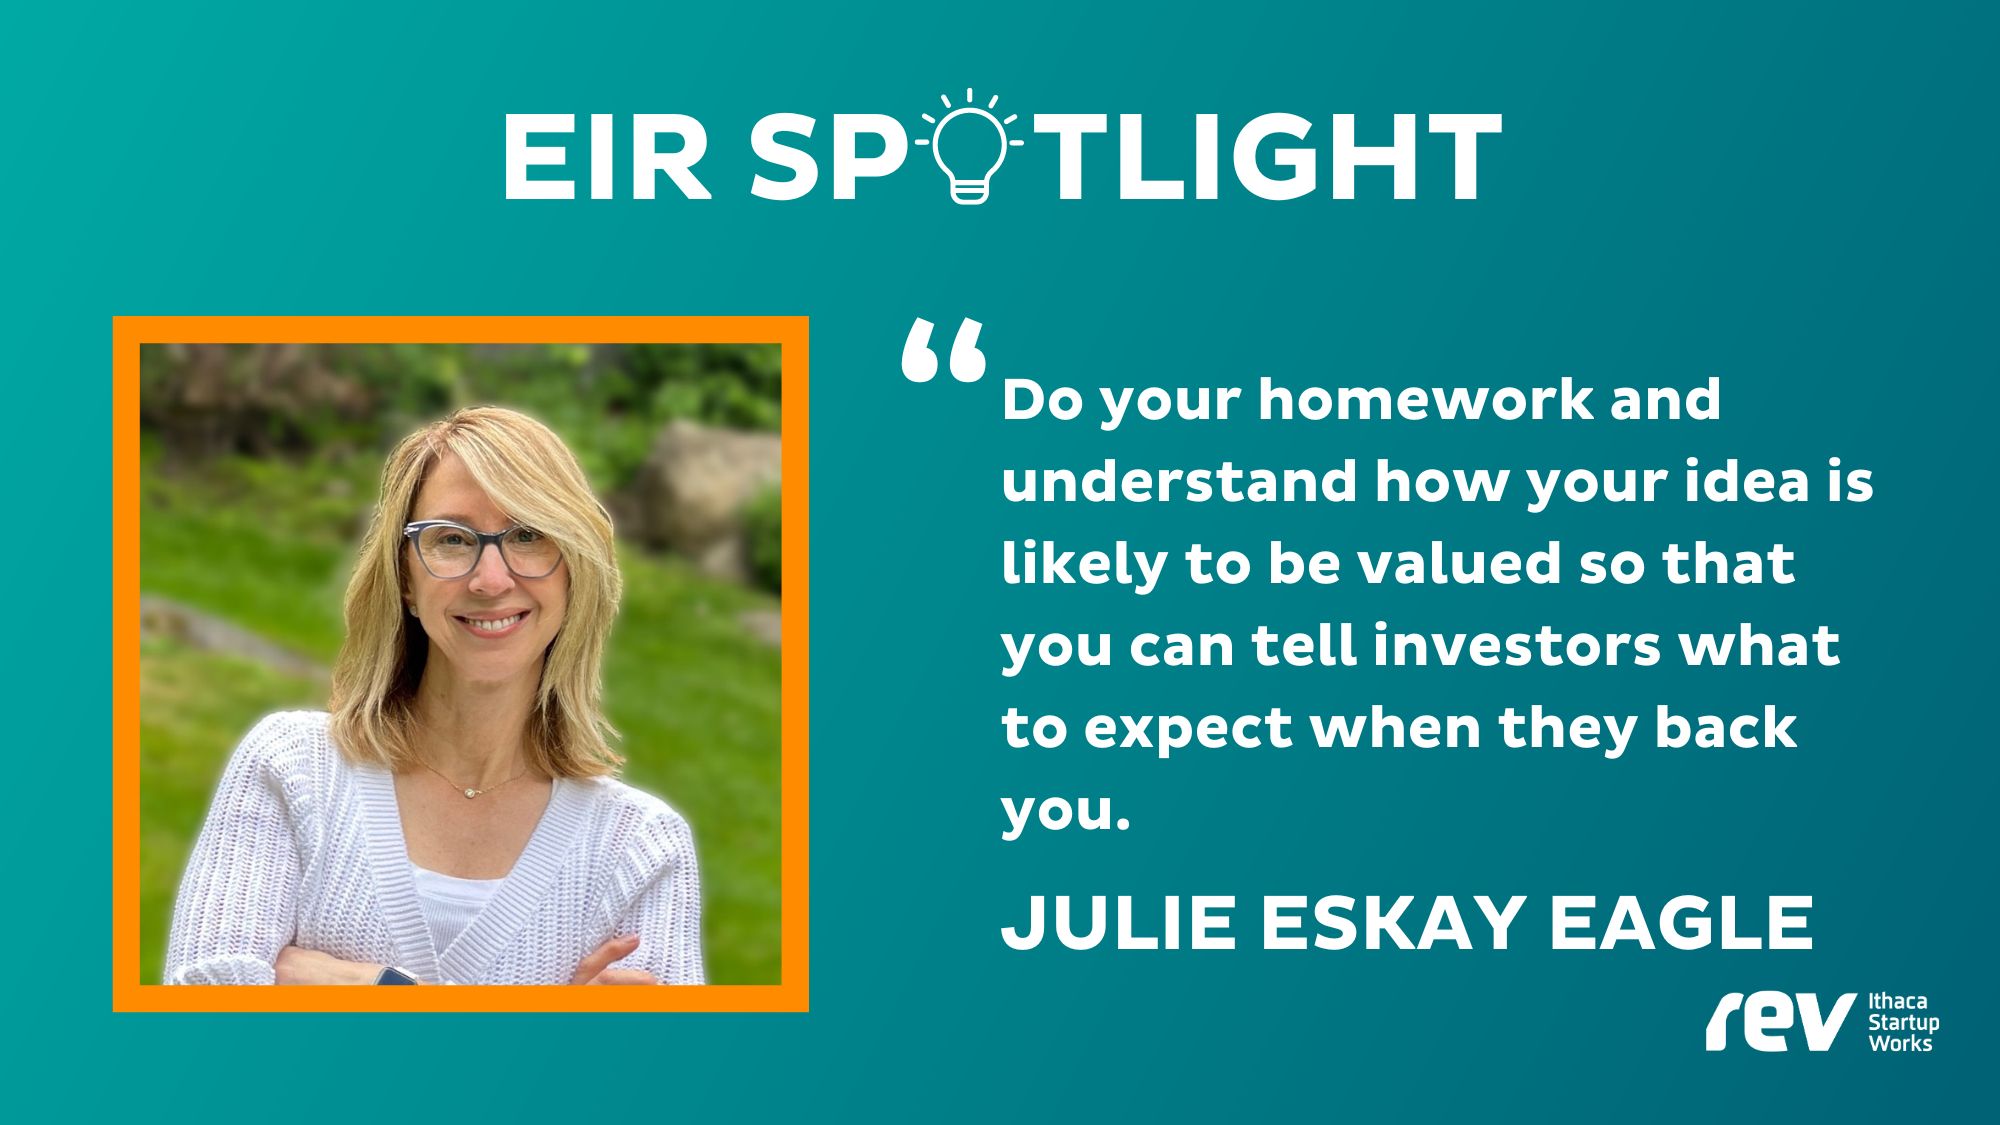 Slide of Julie Eskay Eagle and a quote from her about entrepreneurshiop